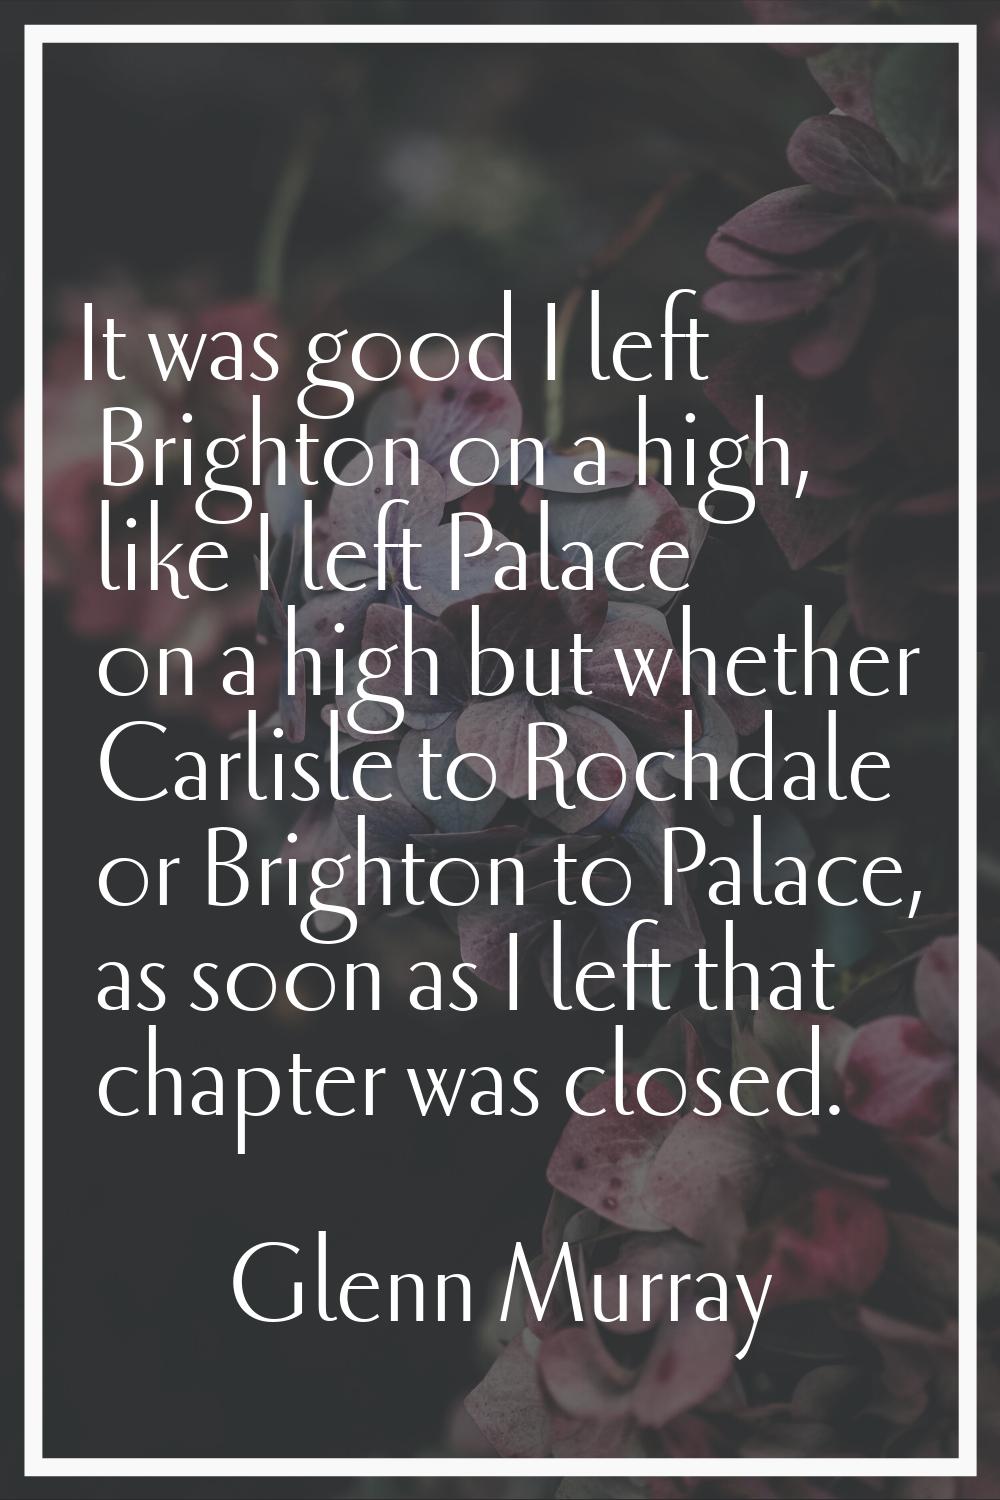 It was good I left Brighton on a high, like I left Palace on a high but whether Carlisle to Rochdal